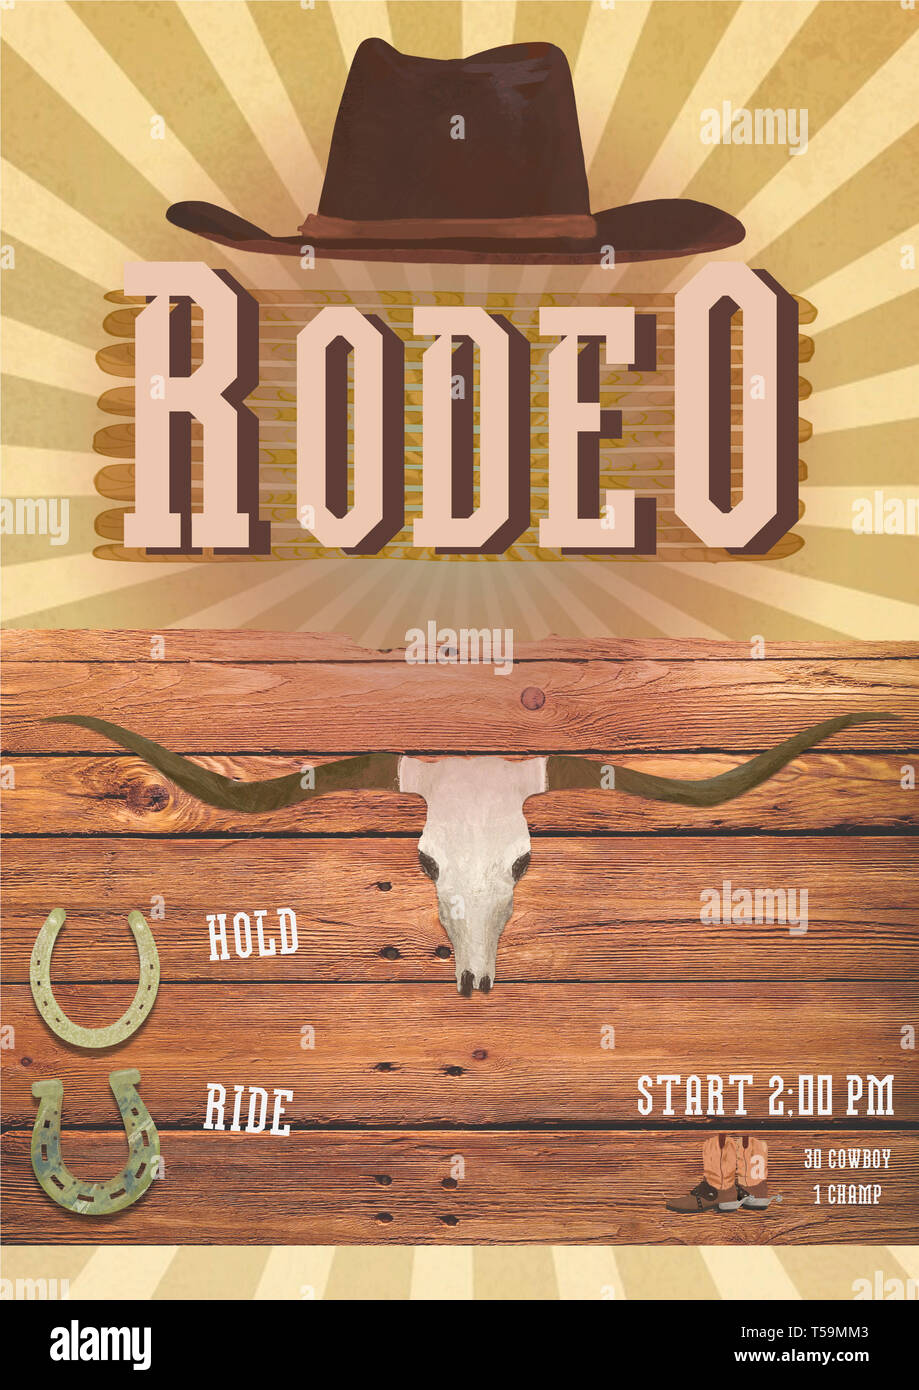 invite template for a rodeo or wild west theme party stock photo